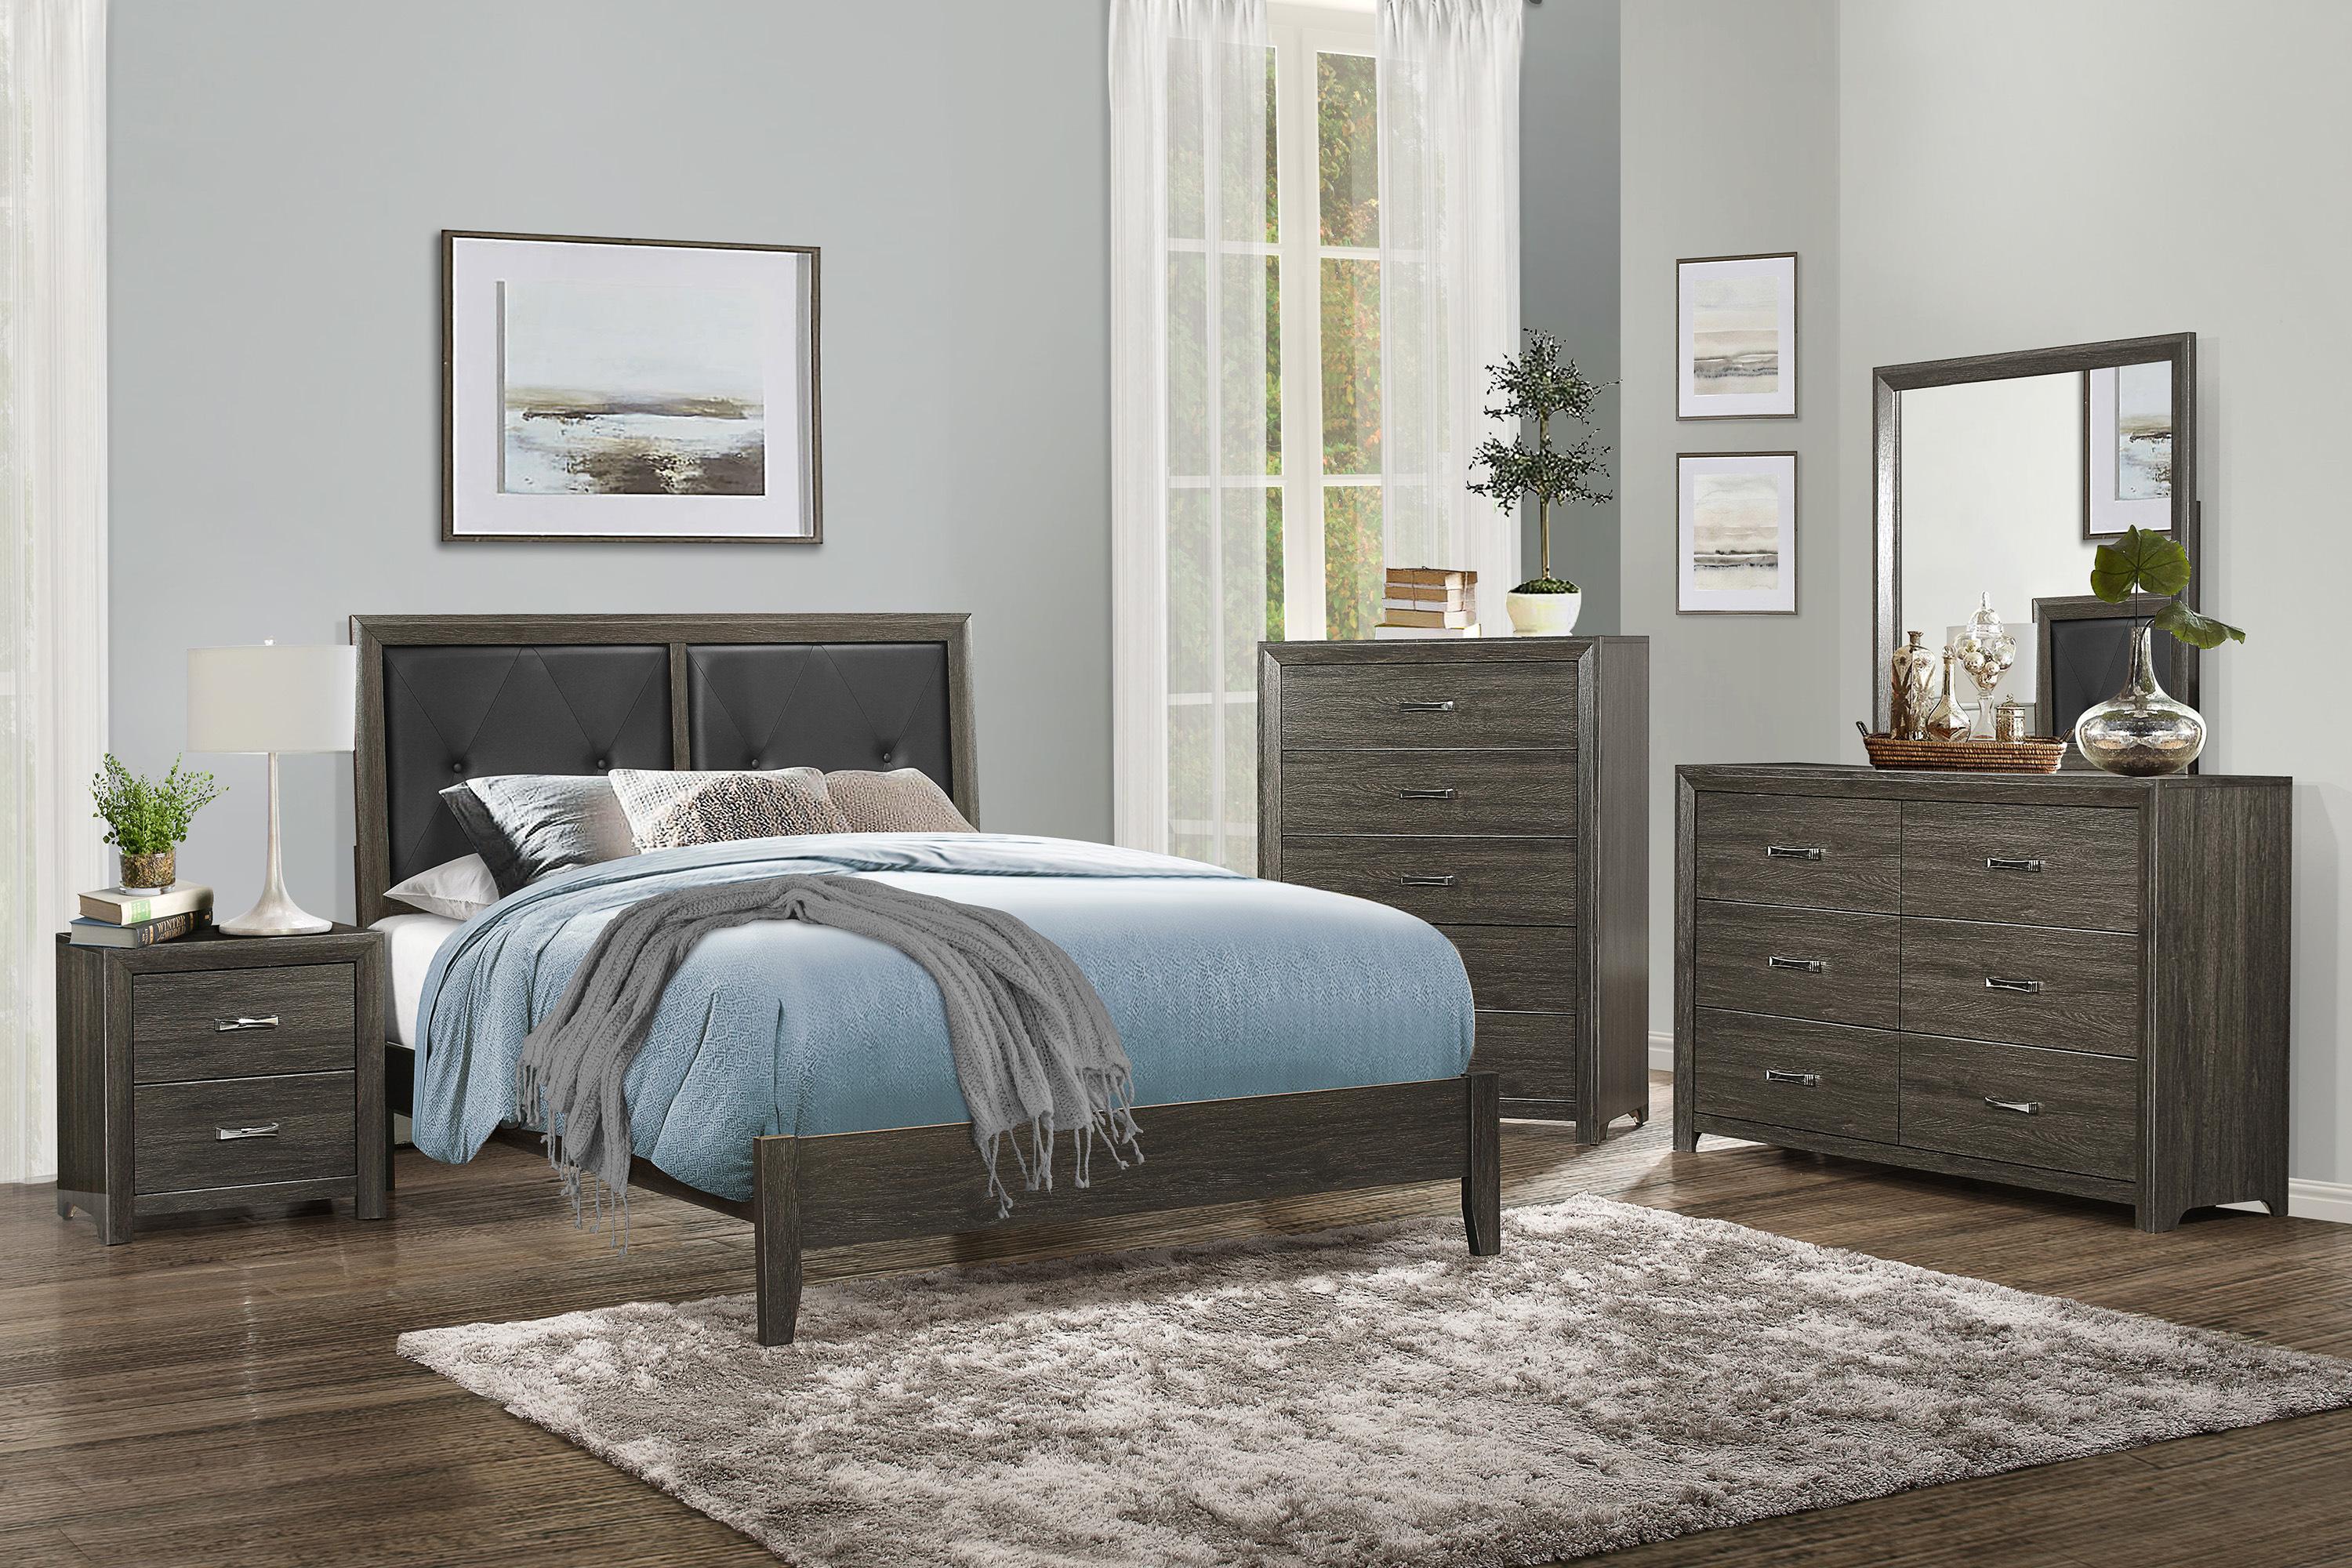 Contemporary Bedroom Set 2145NP-1-5PC Edina 2145NP-1-5PC in Dark Gray Faux Leather